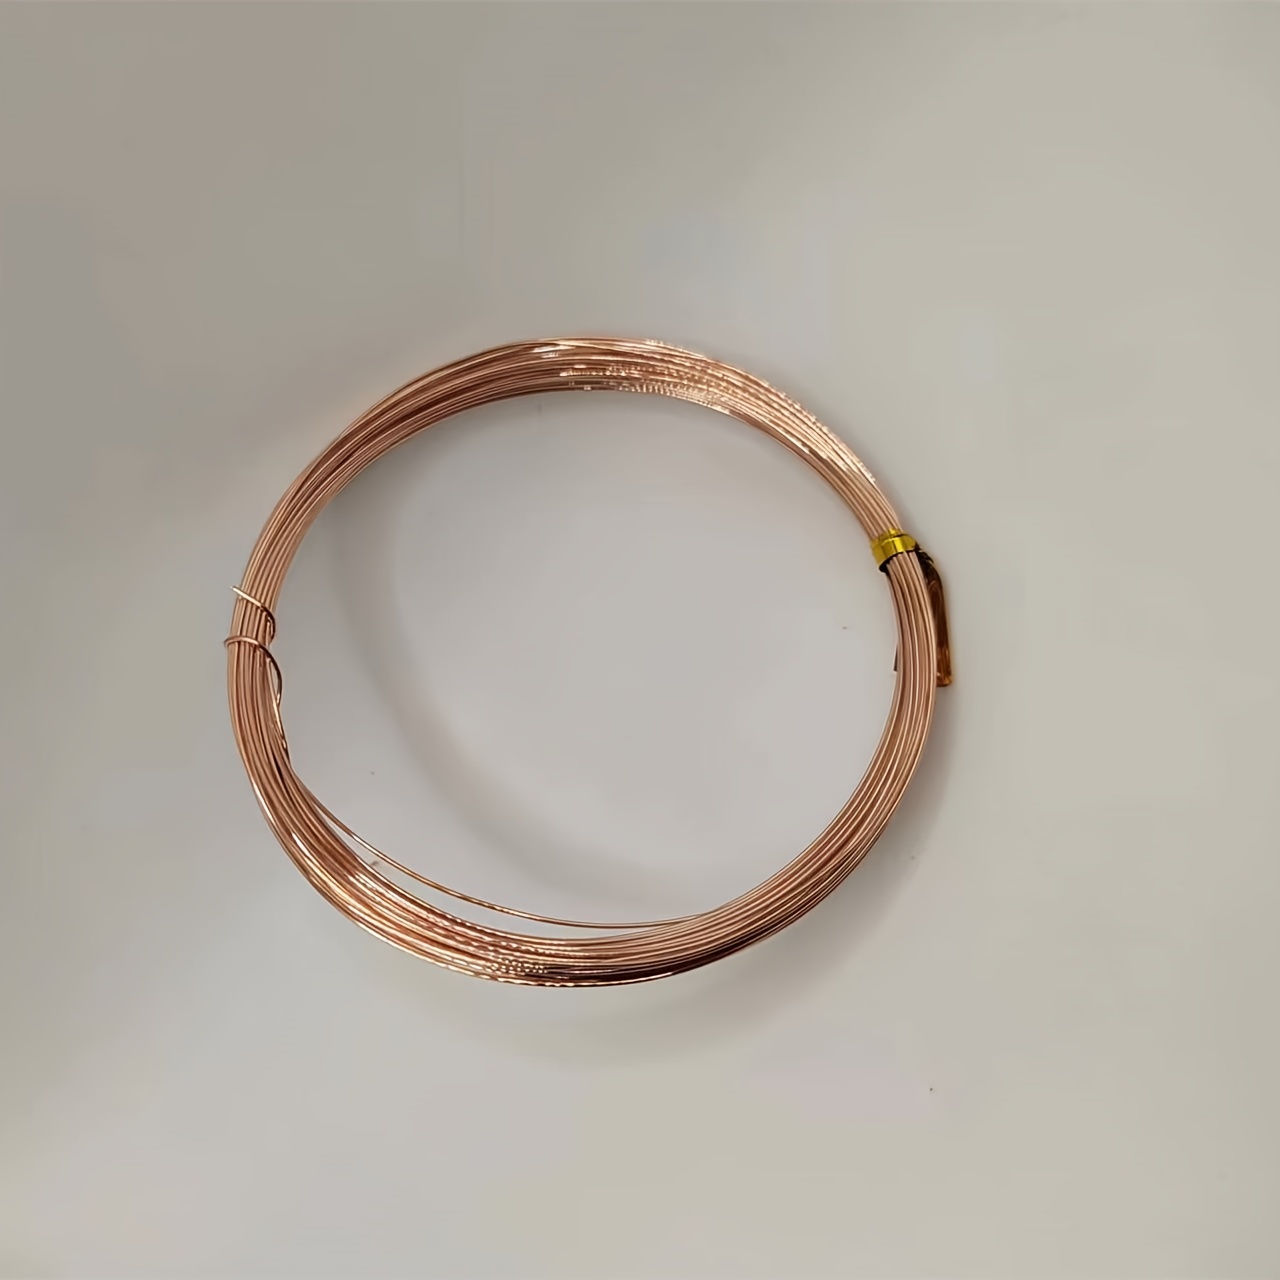 22 Gauge Bare Copper Wire 0.7mm Pure Copper Wire Soft Wire 32 Feet (One  Roll) 10 Meters Length Solid Bare Copper Wire Round